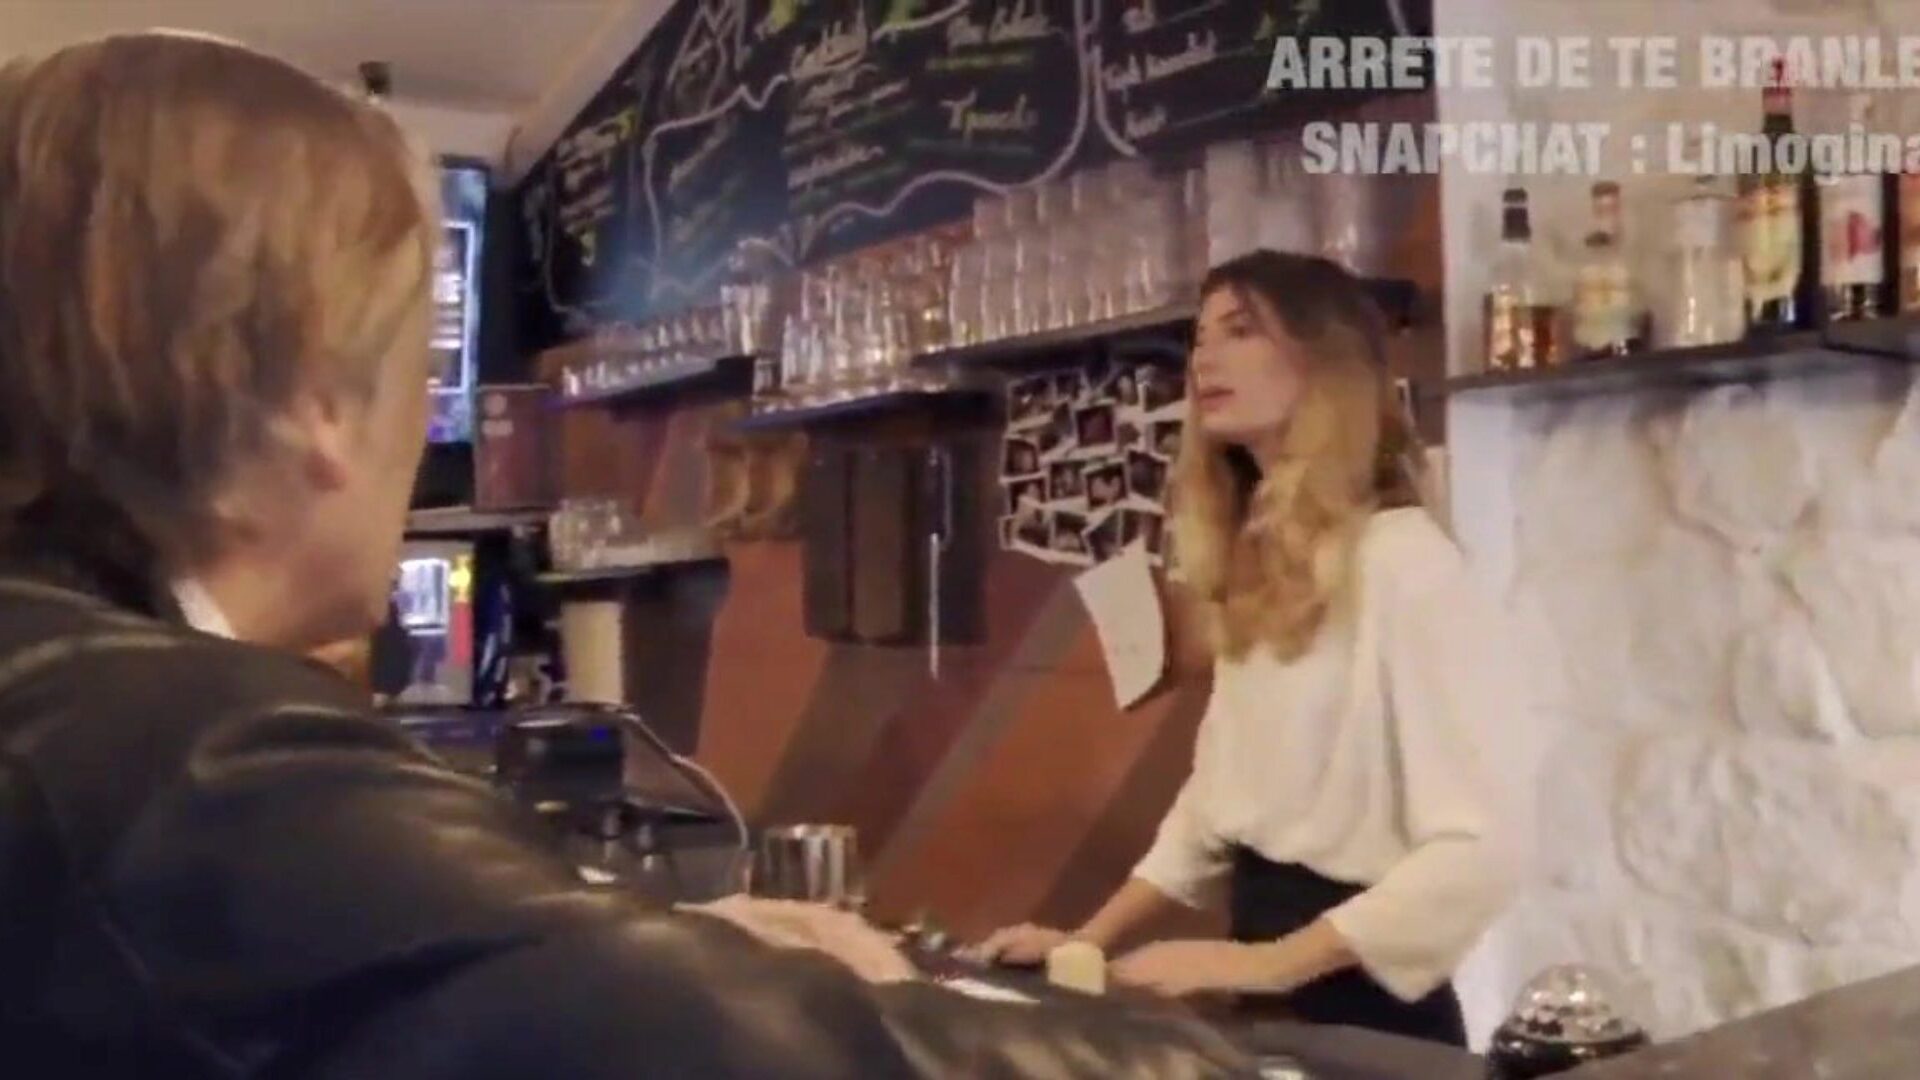 etudiante candice travaille aussi dans un bar: free porn 02 watch etudiante candice travaille aussi dans un bar movie scene on xhamster - the ultimate bevy of free french casting francais hd porno tube videos